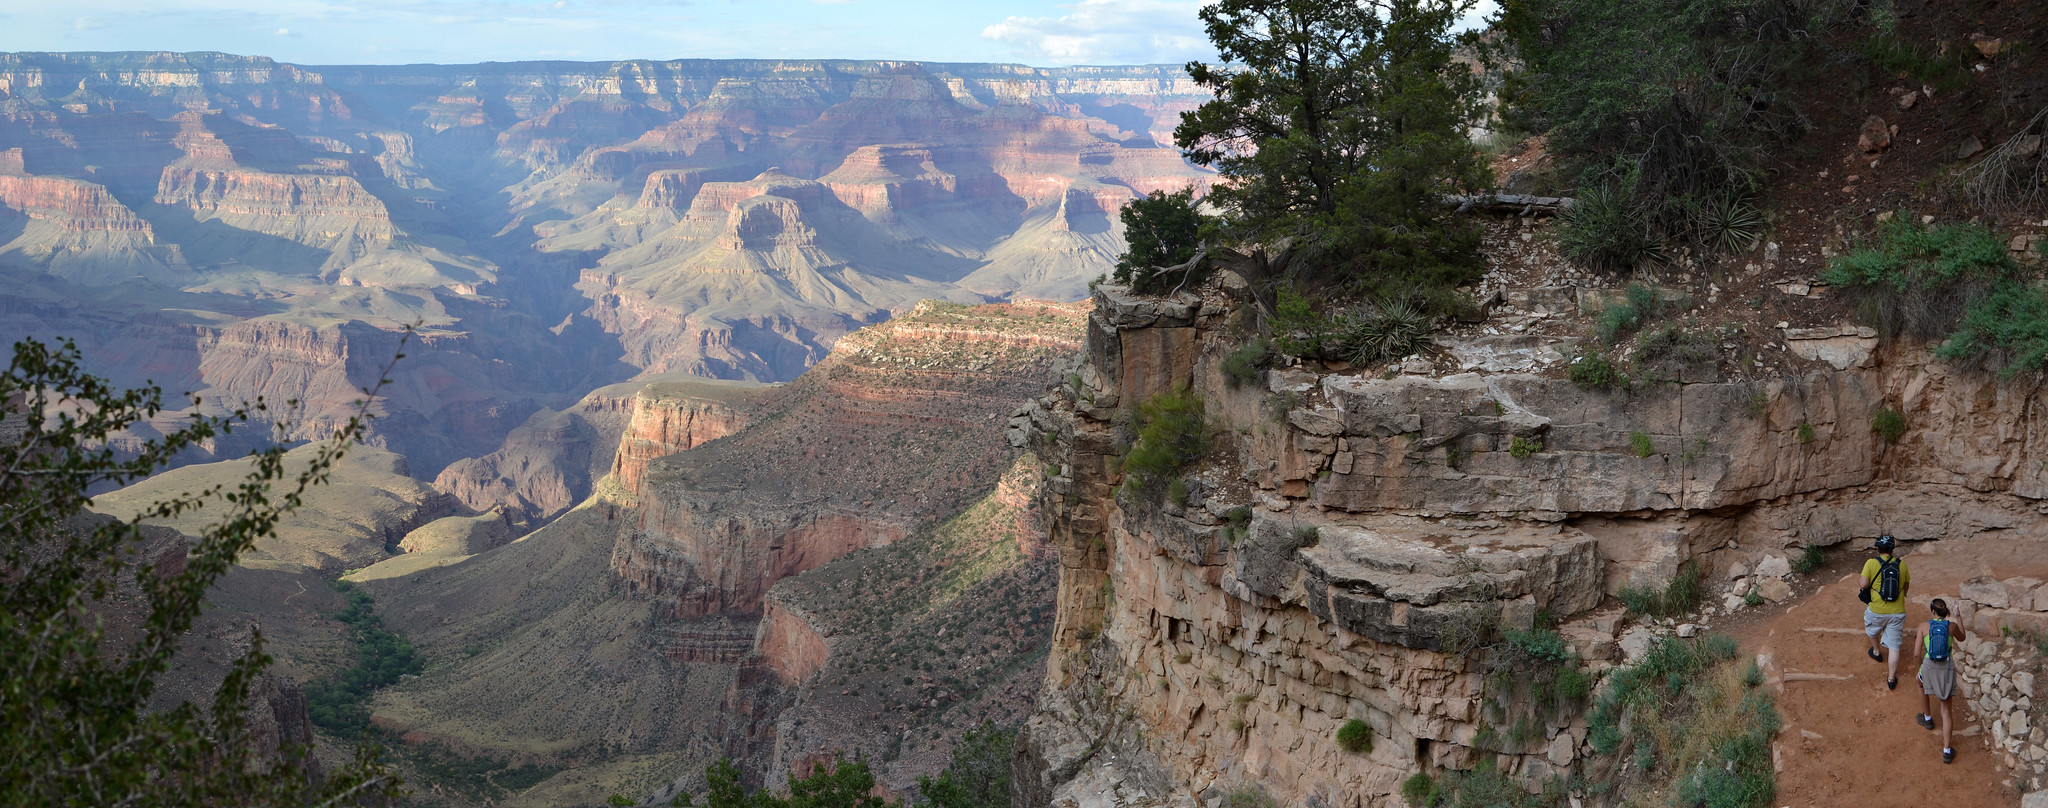 The Grand Canyon is one of the national parks in Arizona still open during the coronavirus.